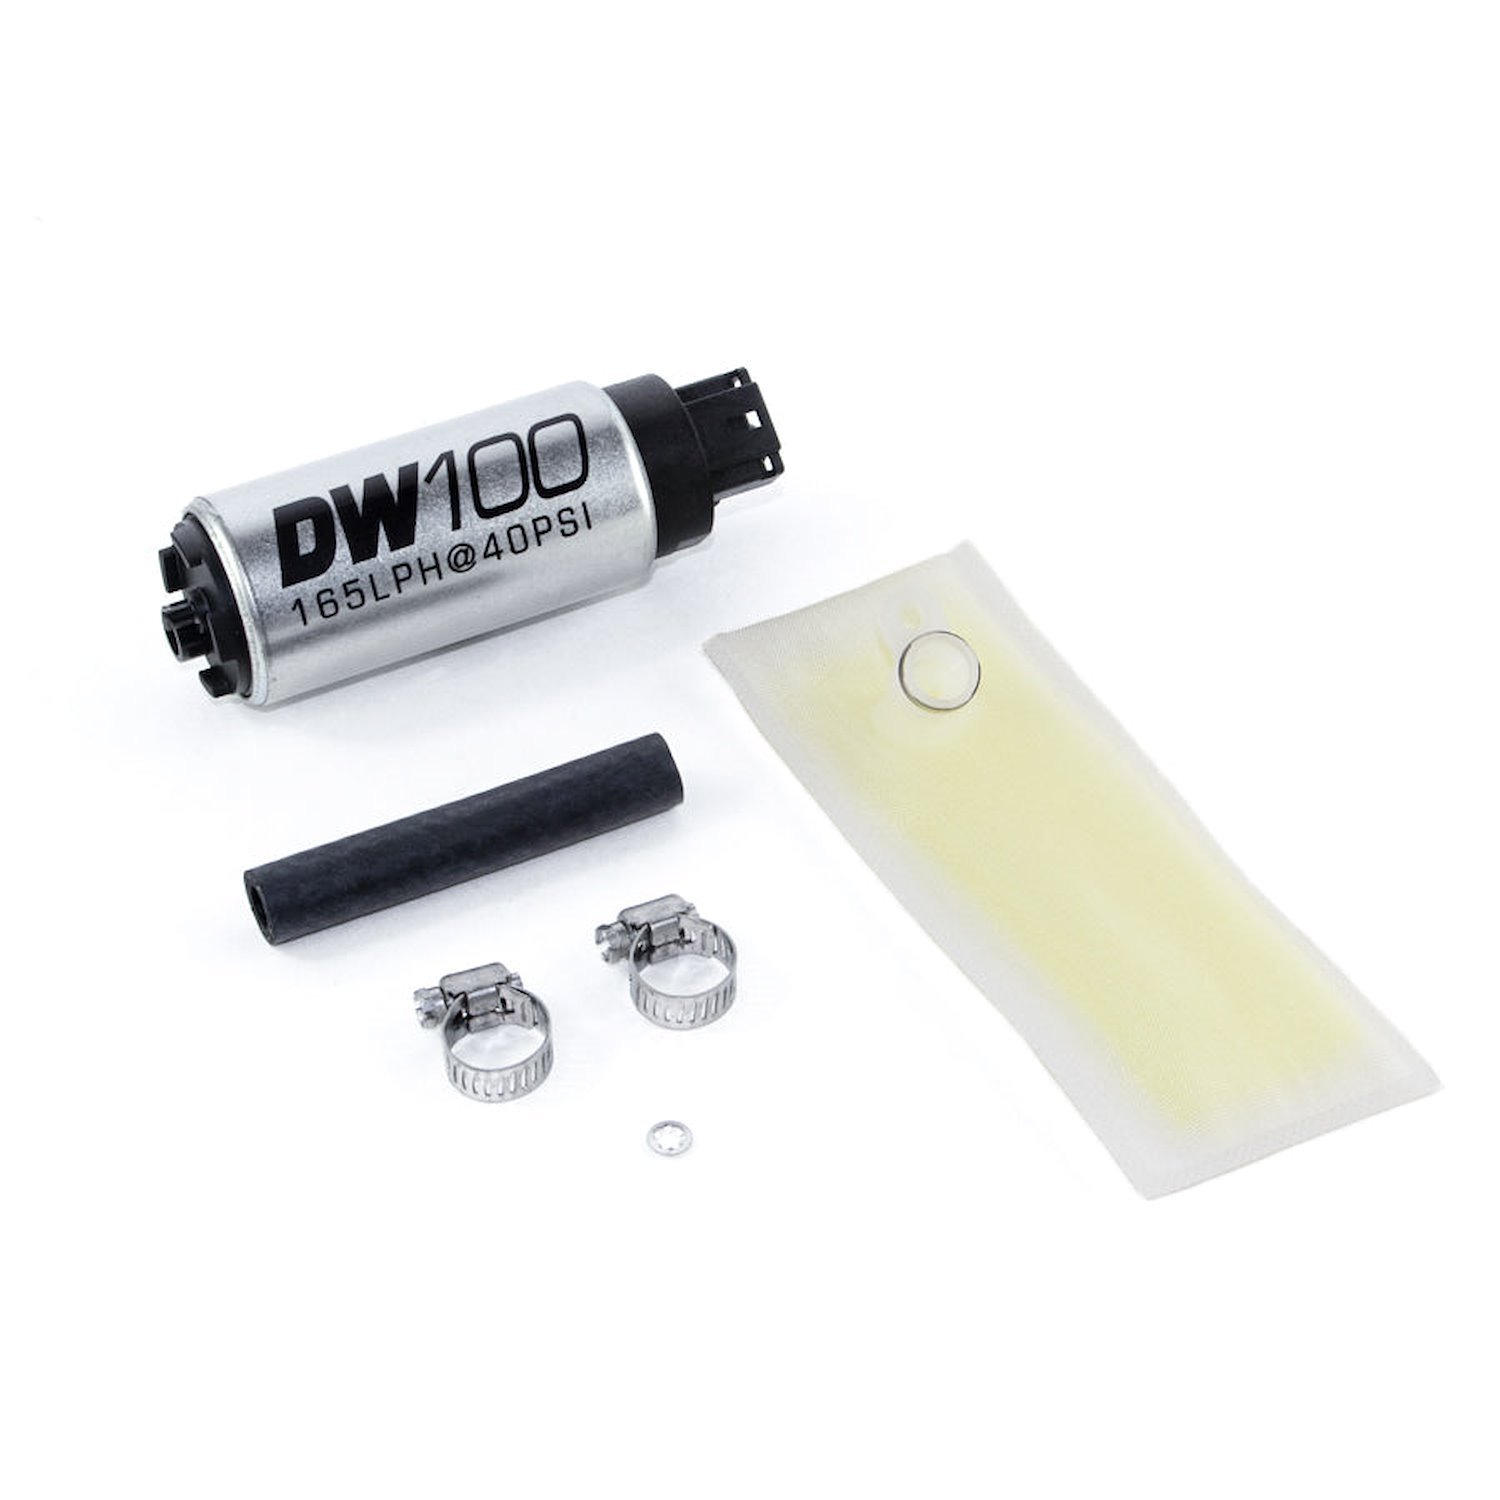 91010846 DW100 series 165lph in-tank fuel pump w/ install kit for Integra 94-01 and Civic 92-00 OE REPLACEMENT